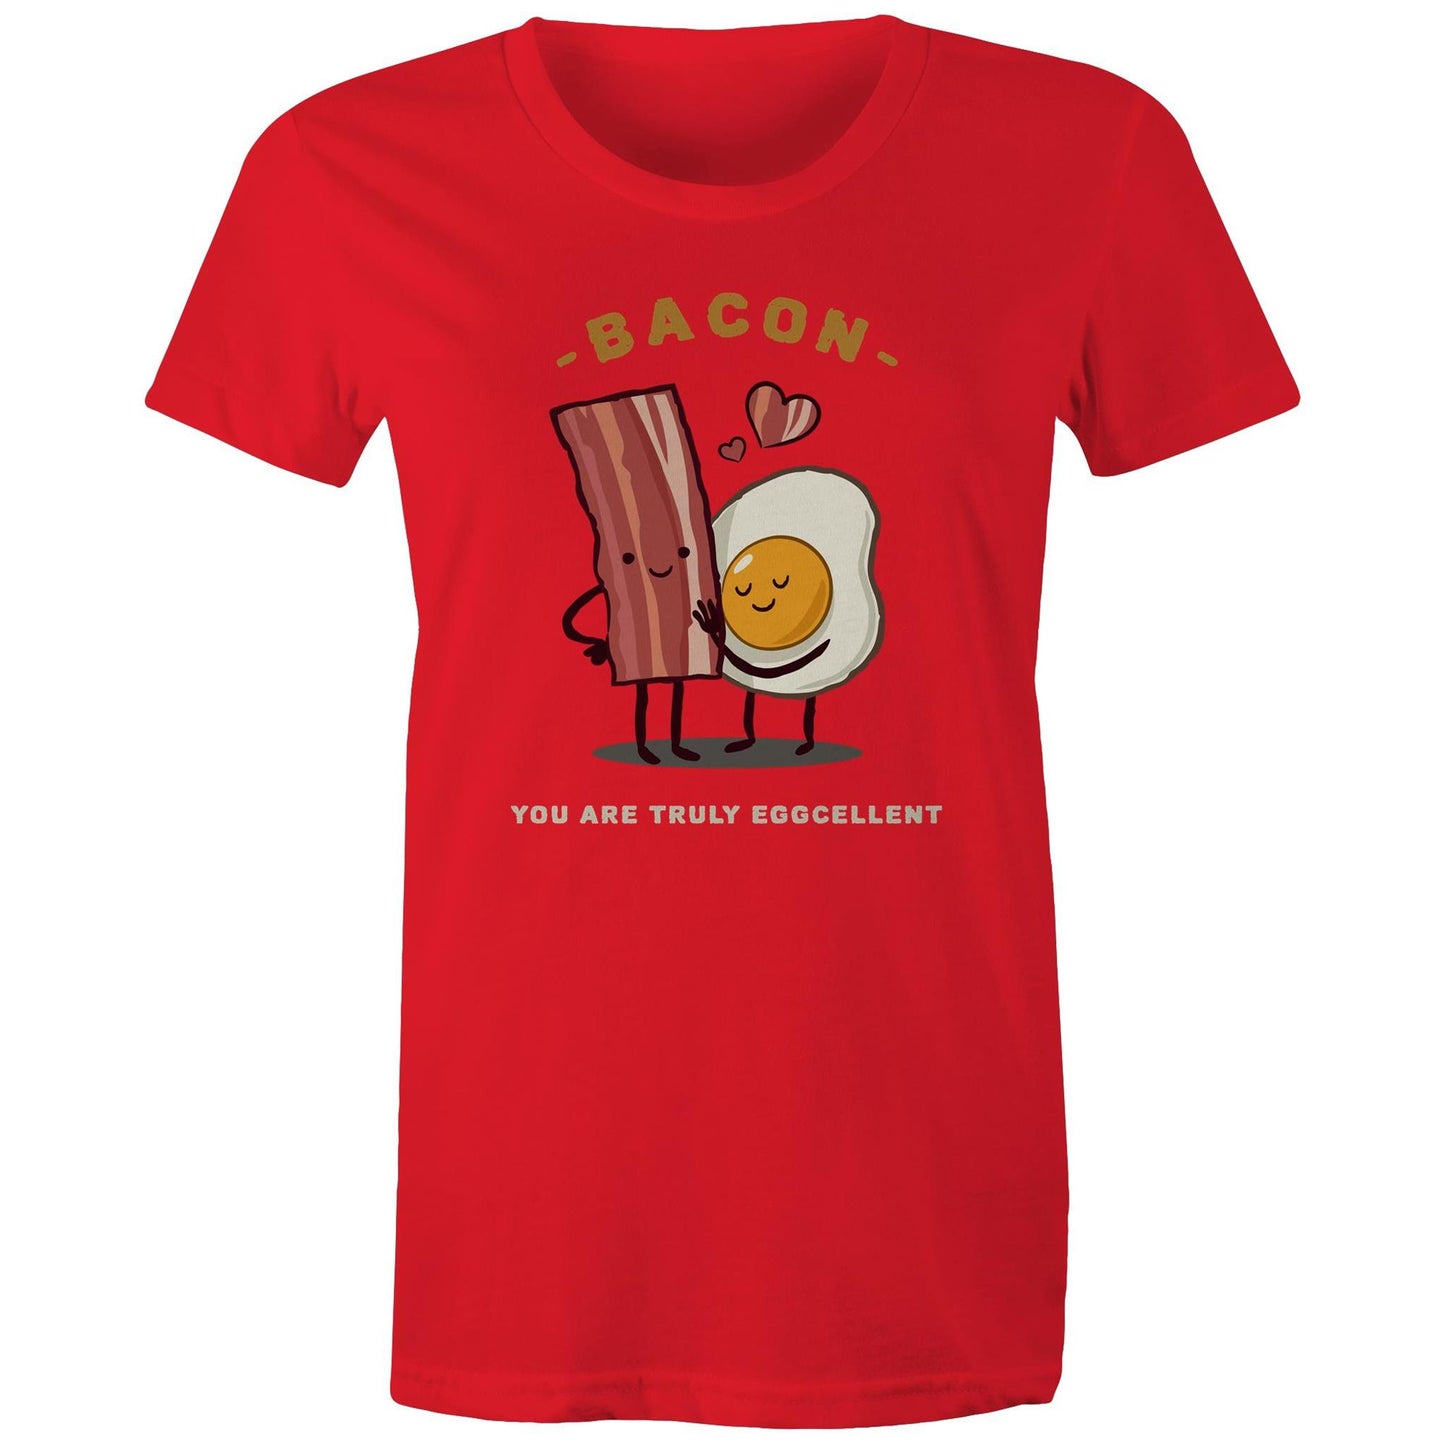 Bacon, You Are Truly Eggcellent - Womens T-shirt Red Womens T-shirt Food